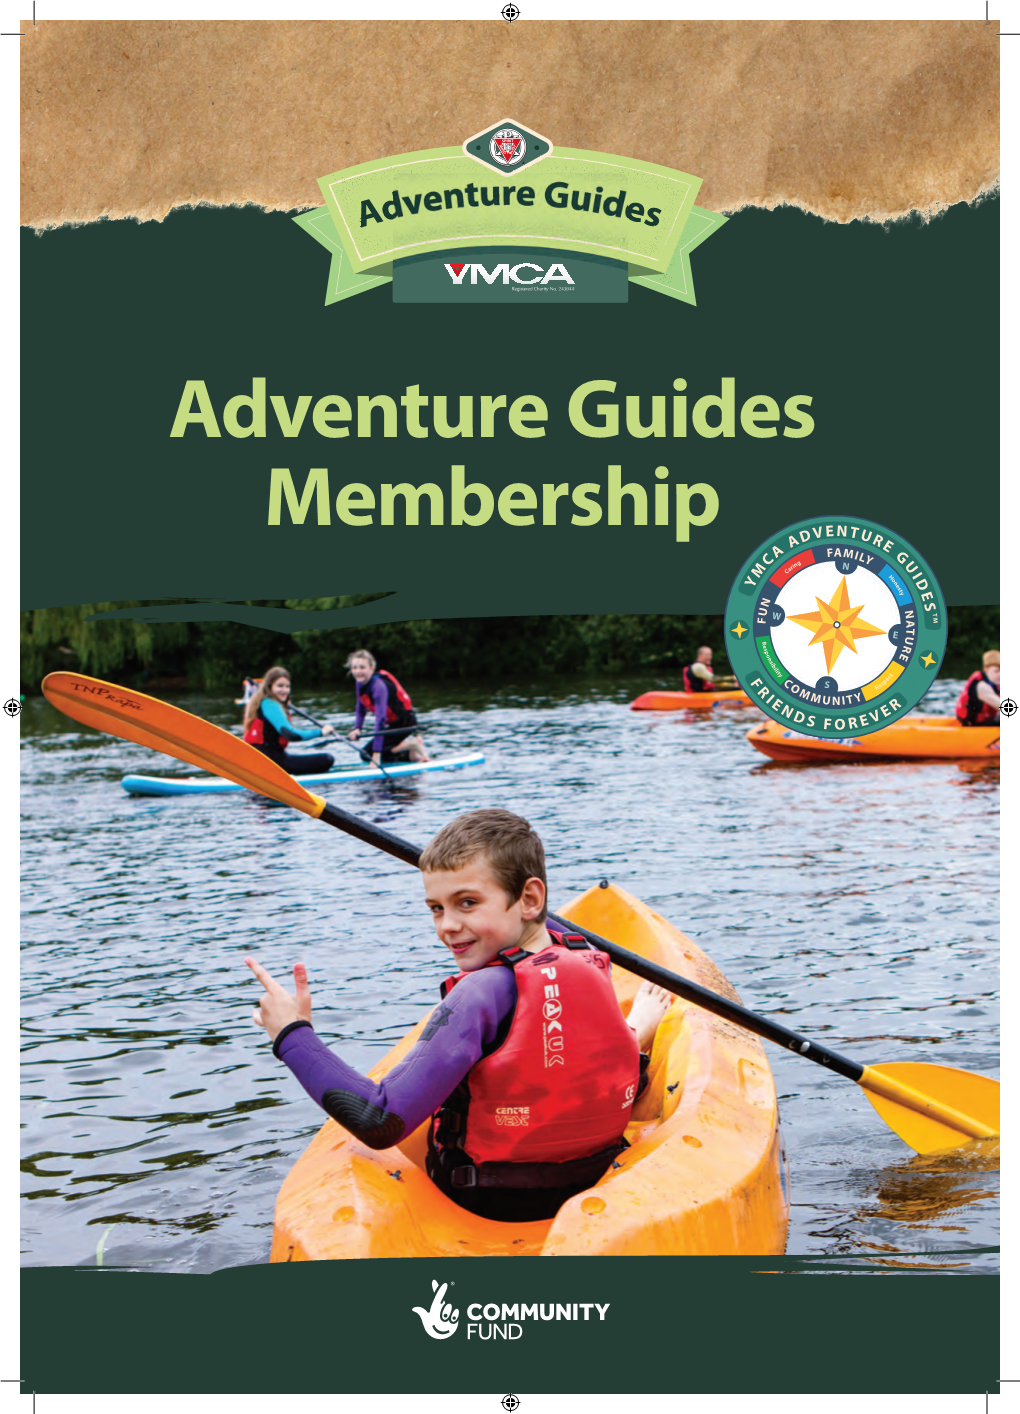 NYMCA-0529 Adventure Guides Editable Pdfs 08.Indd